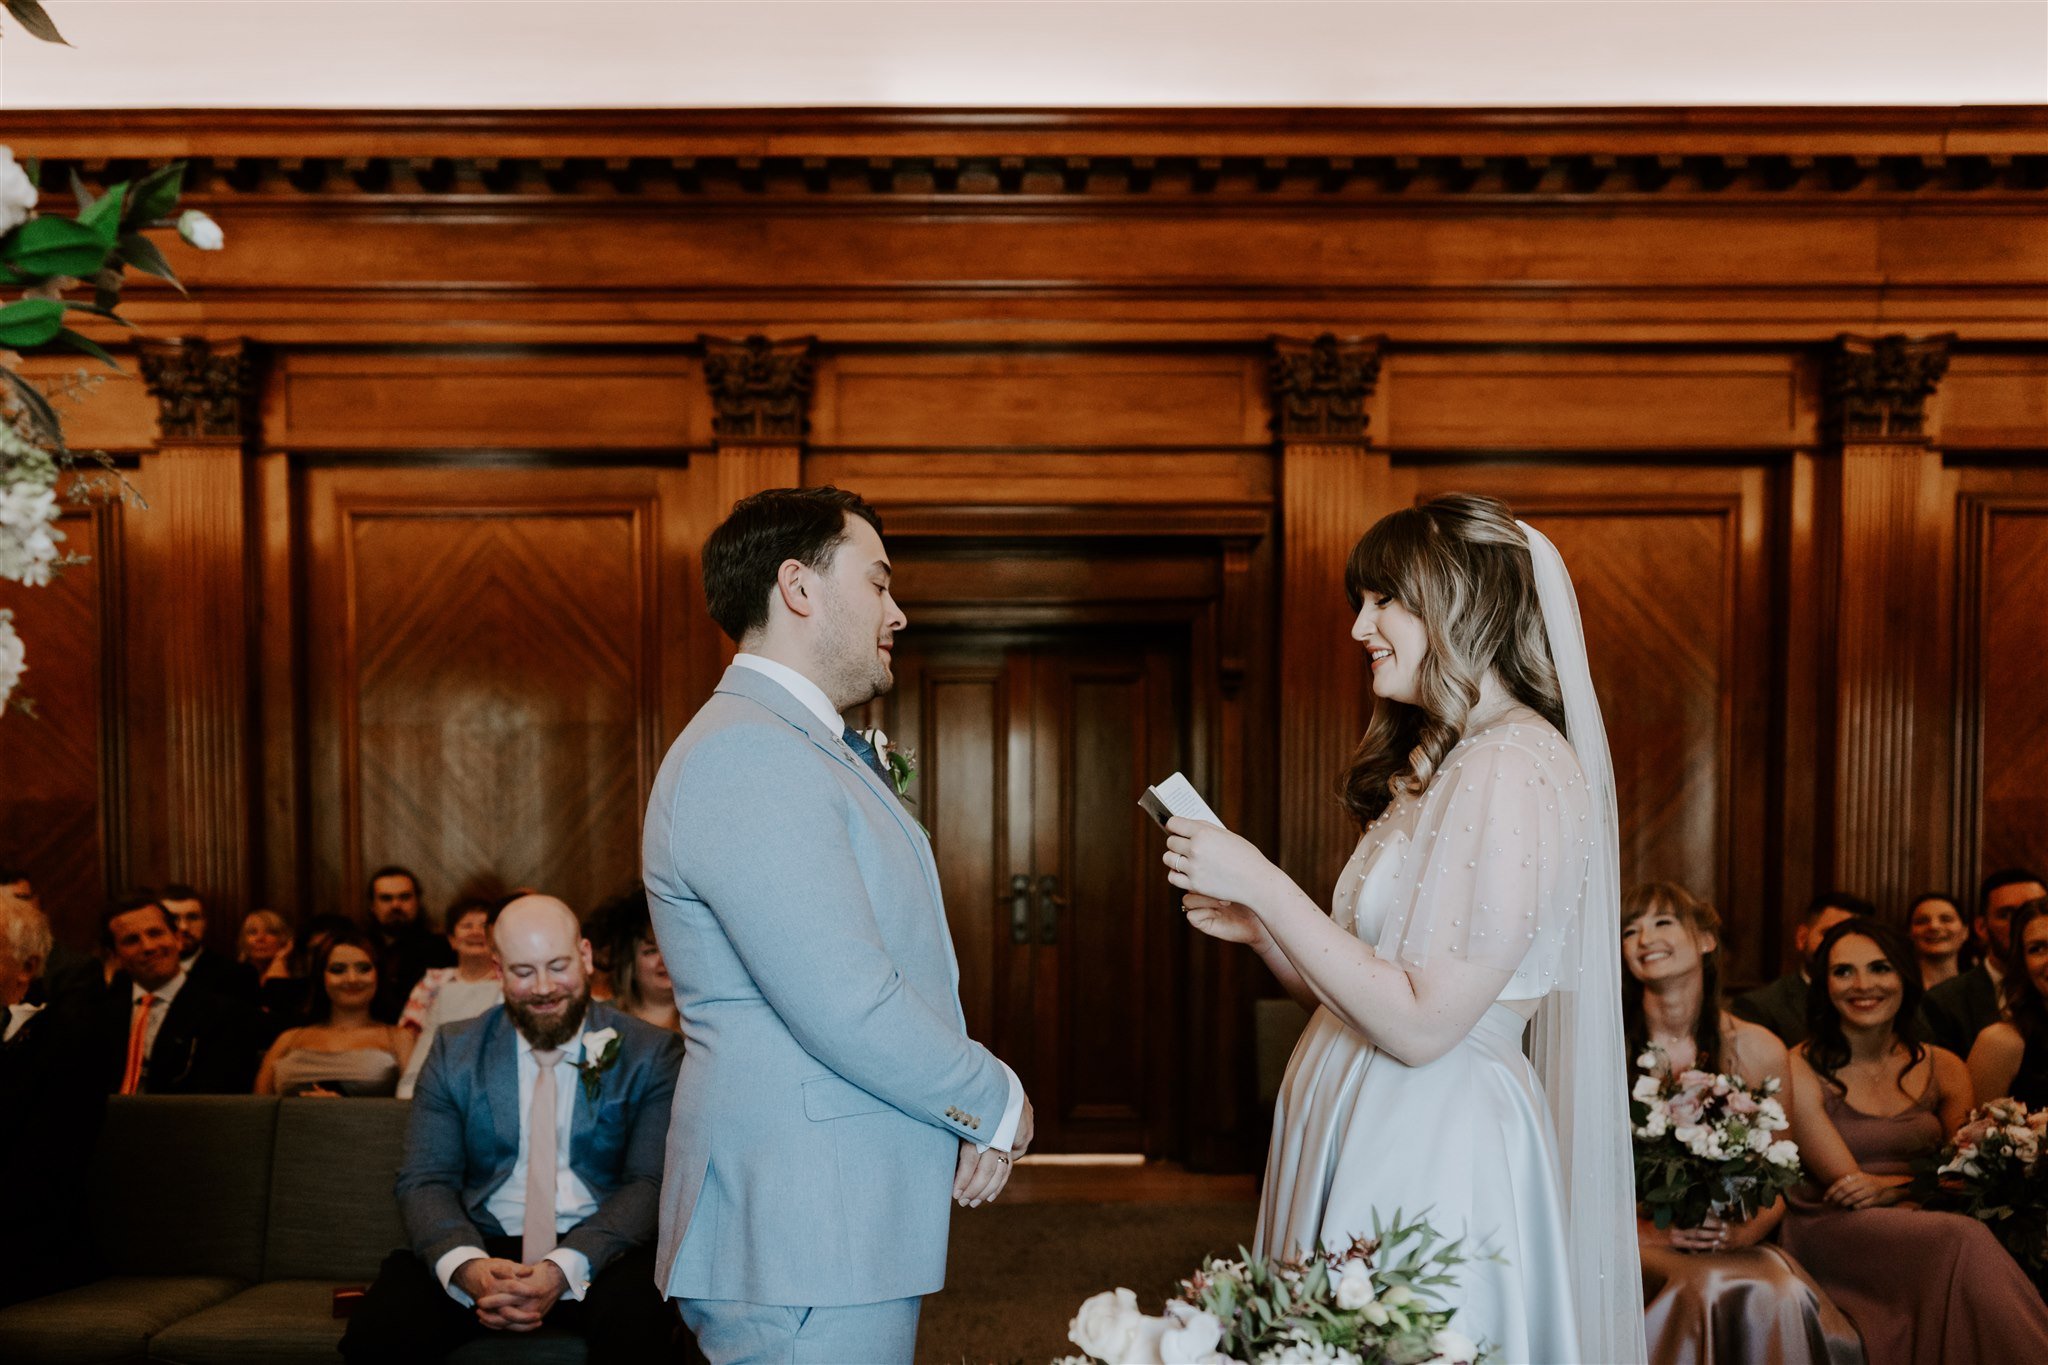 personal vows read Marylebone Town Hall wedding ceremony Pizza party wedding London